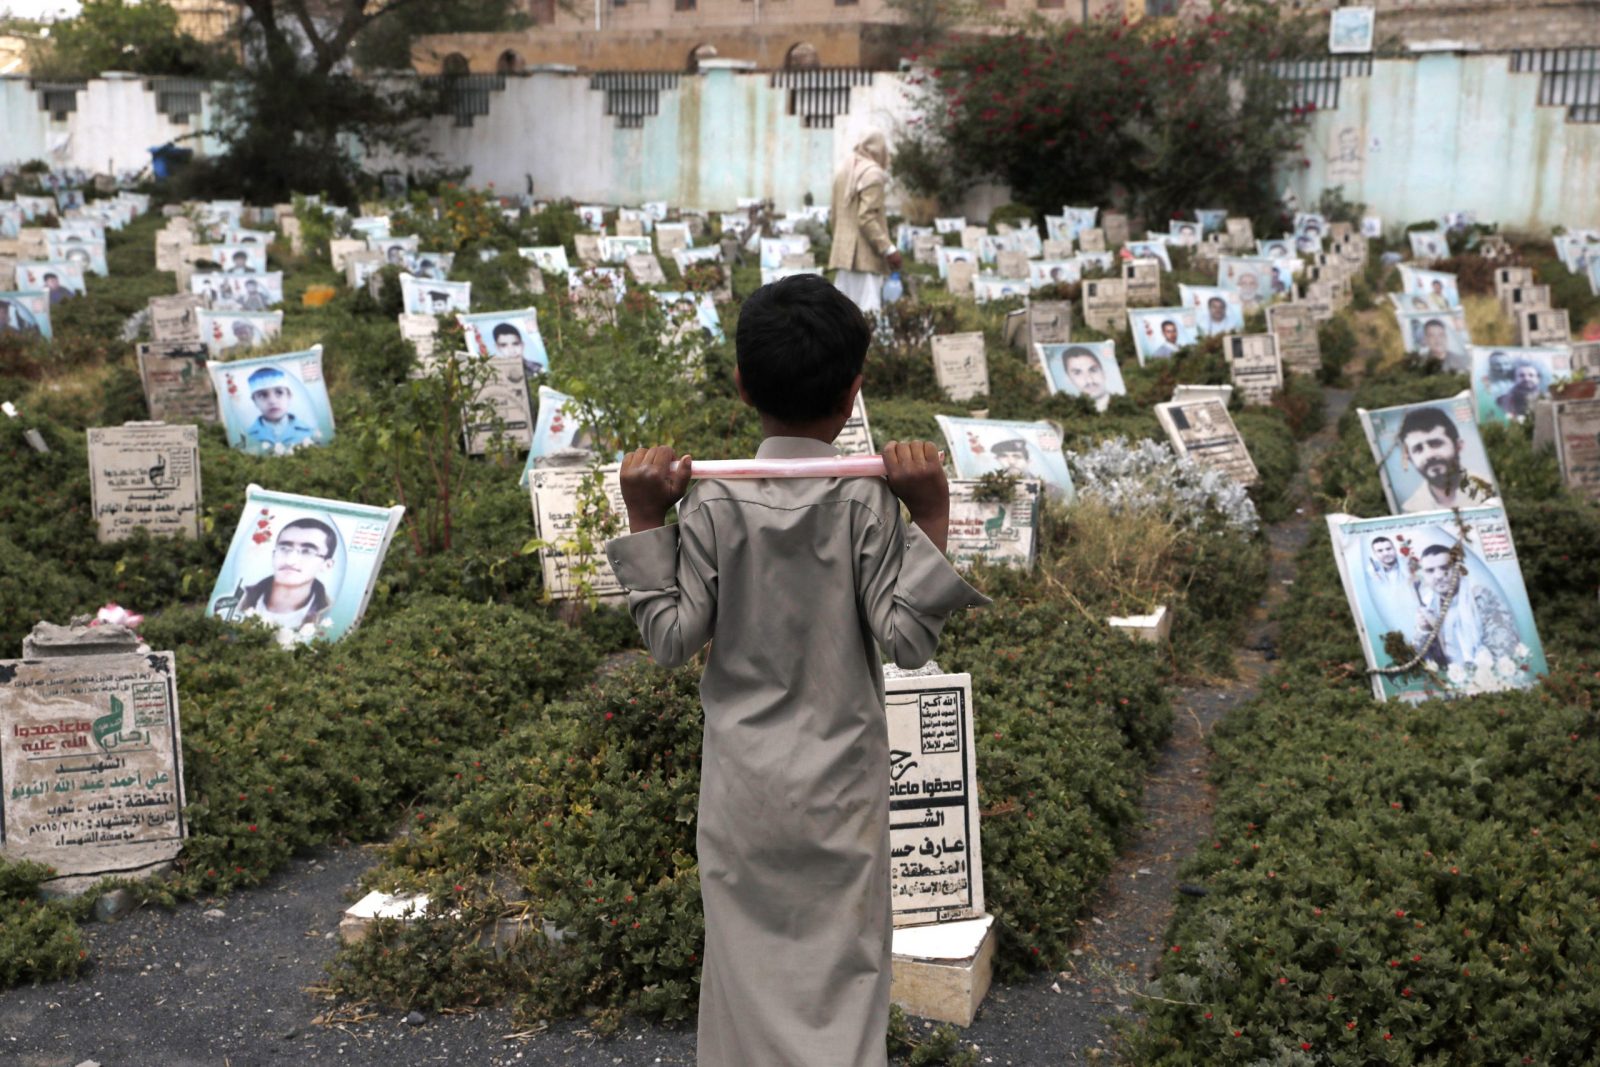 epa10800228 A Yemeni child stands next to graves with portraits of children killed in Yemen's prolonged war, at a cemetery in Sana'a, Yemen, 14 August 2023. The Houthis movement has accused the Saudi-led coalition of killing over 8,000 children in Yemen since the war began in March 2015 when the coalition launched a military operation and an airstrike campaign against the Houthis who drove out the Saudi-backed Yemeni government from large parts of the Arab country, including the capital Sana'a.  EPA/YAHYA ARHAB